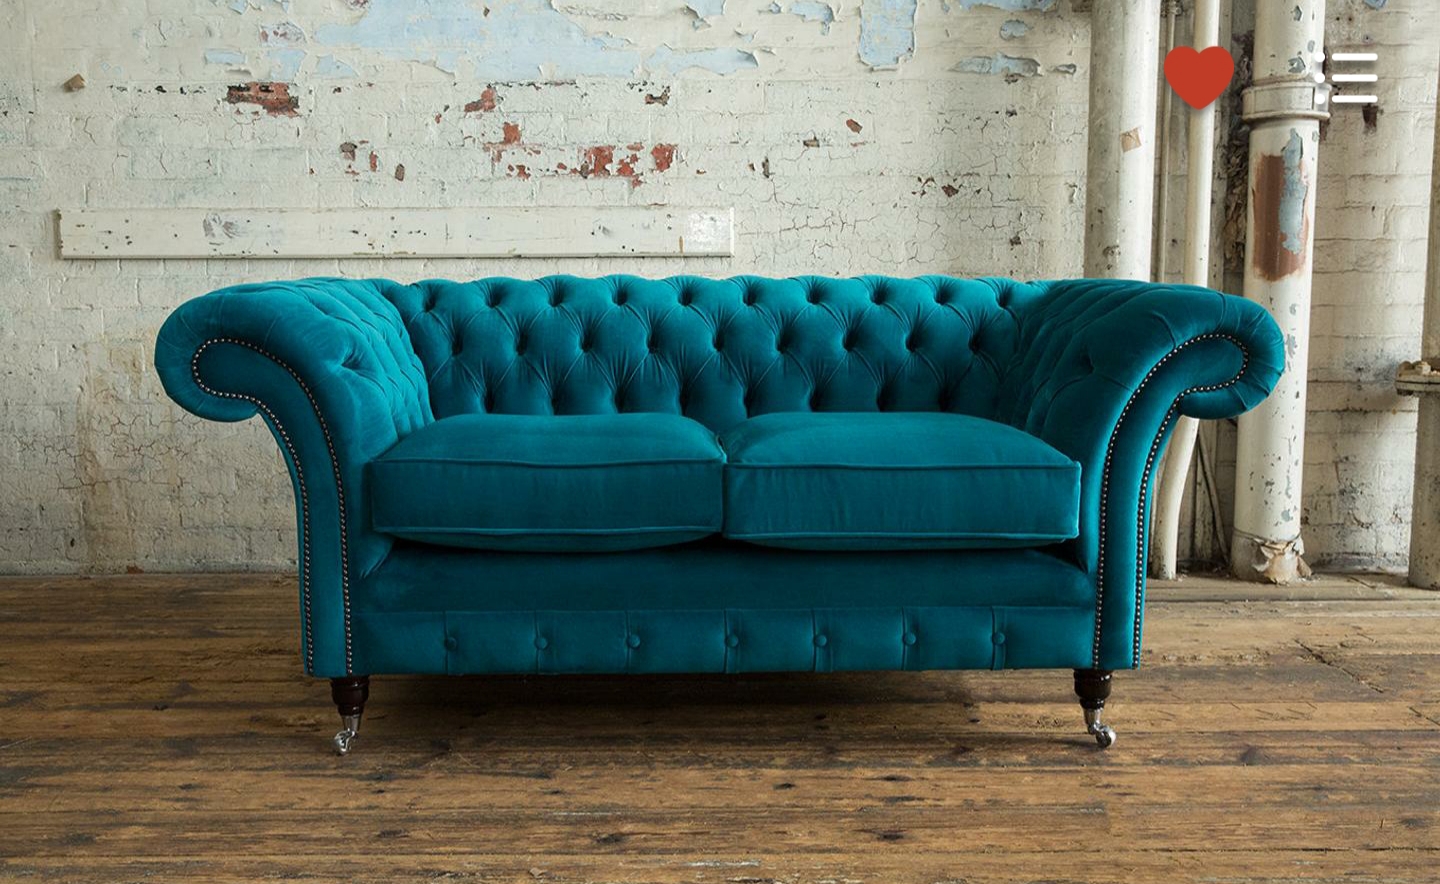 Colourful sofas... blue velvet, yellow leather etc - Page 1 - Homes, Gardens and DIY - PistonHeads